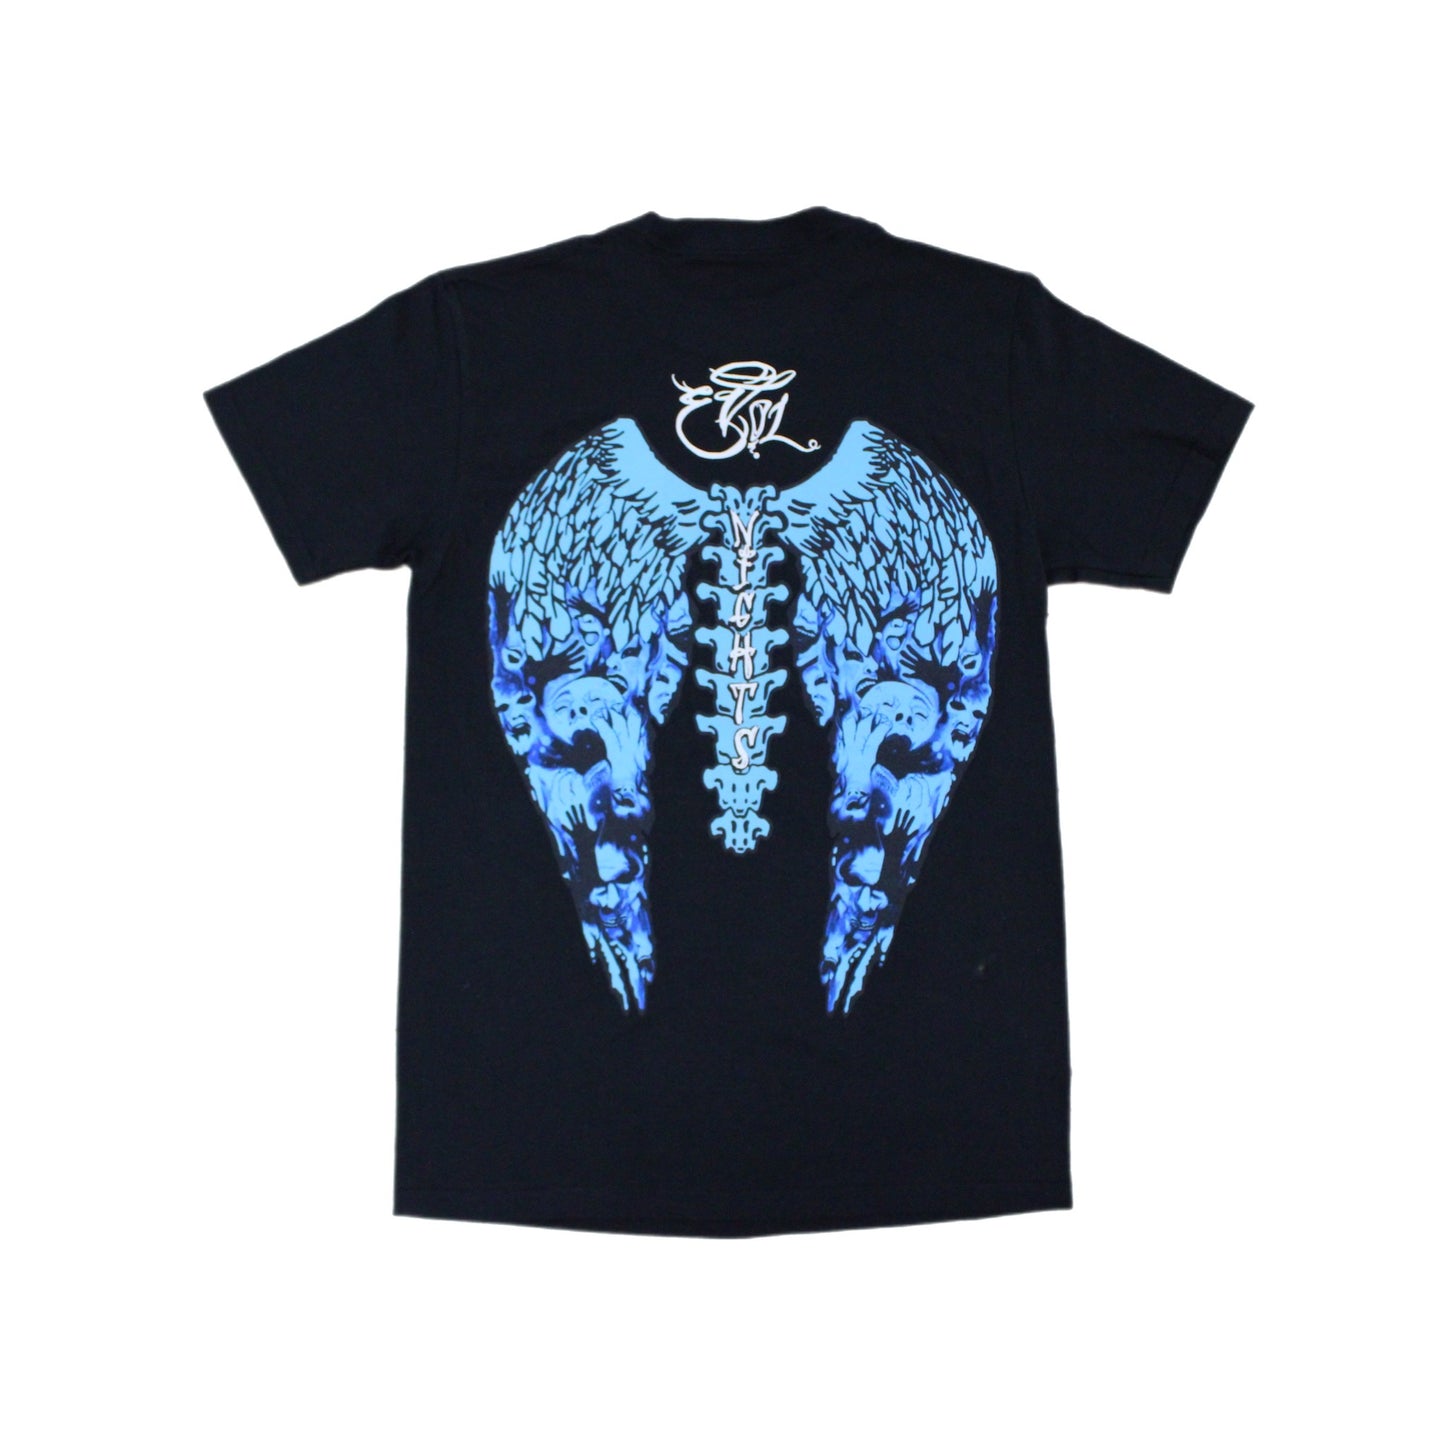 EVOL NIGHTS Trapped Soul Tee Black and Blue